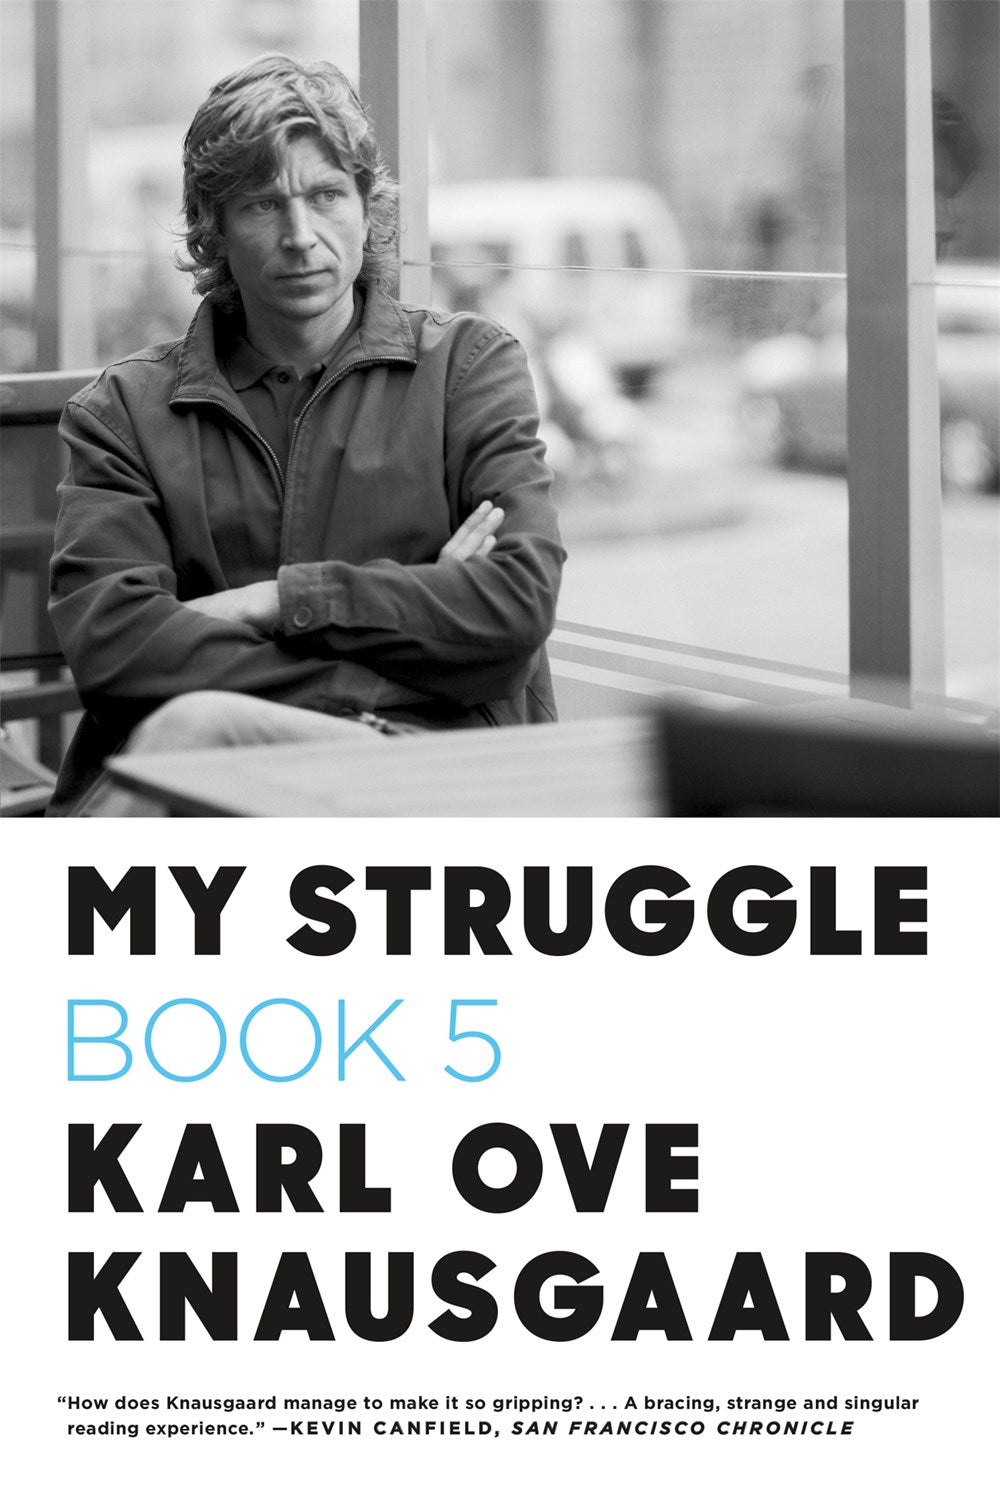 My Struggle: Book 5 (Some Rain Must Fall) by Karl Ove Knausgaard (Translated by Don Bartlett)